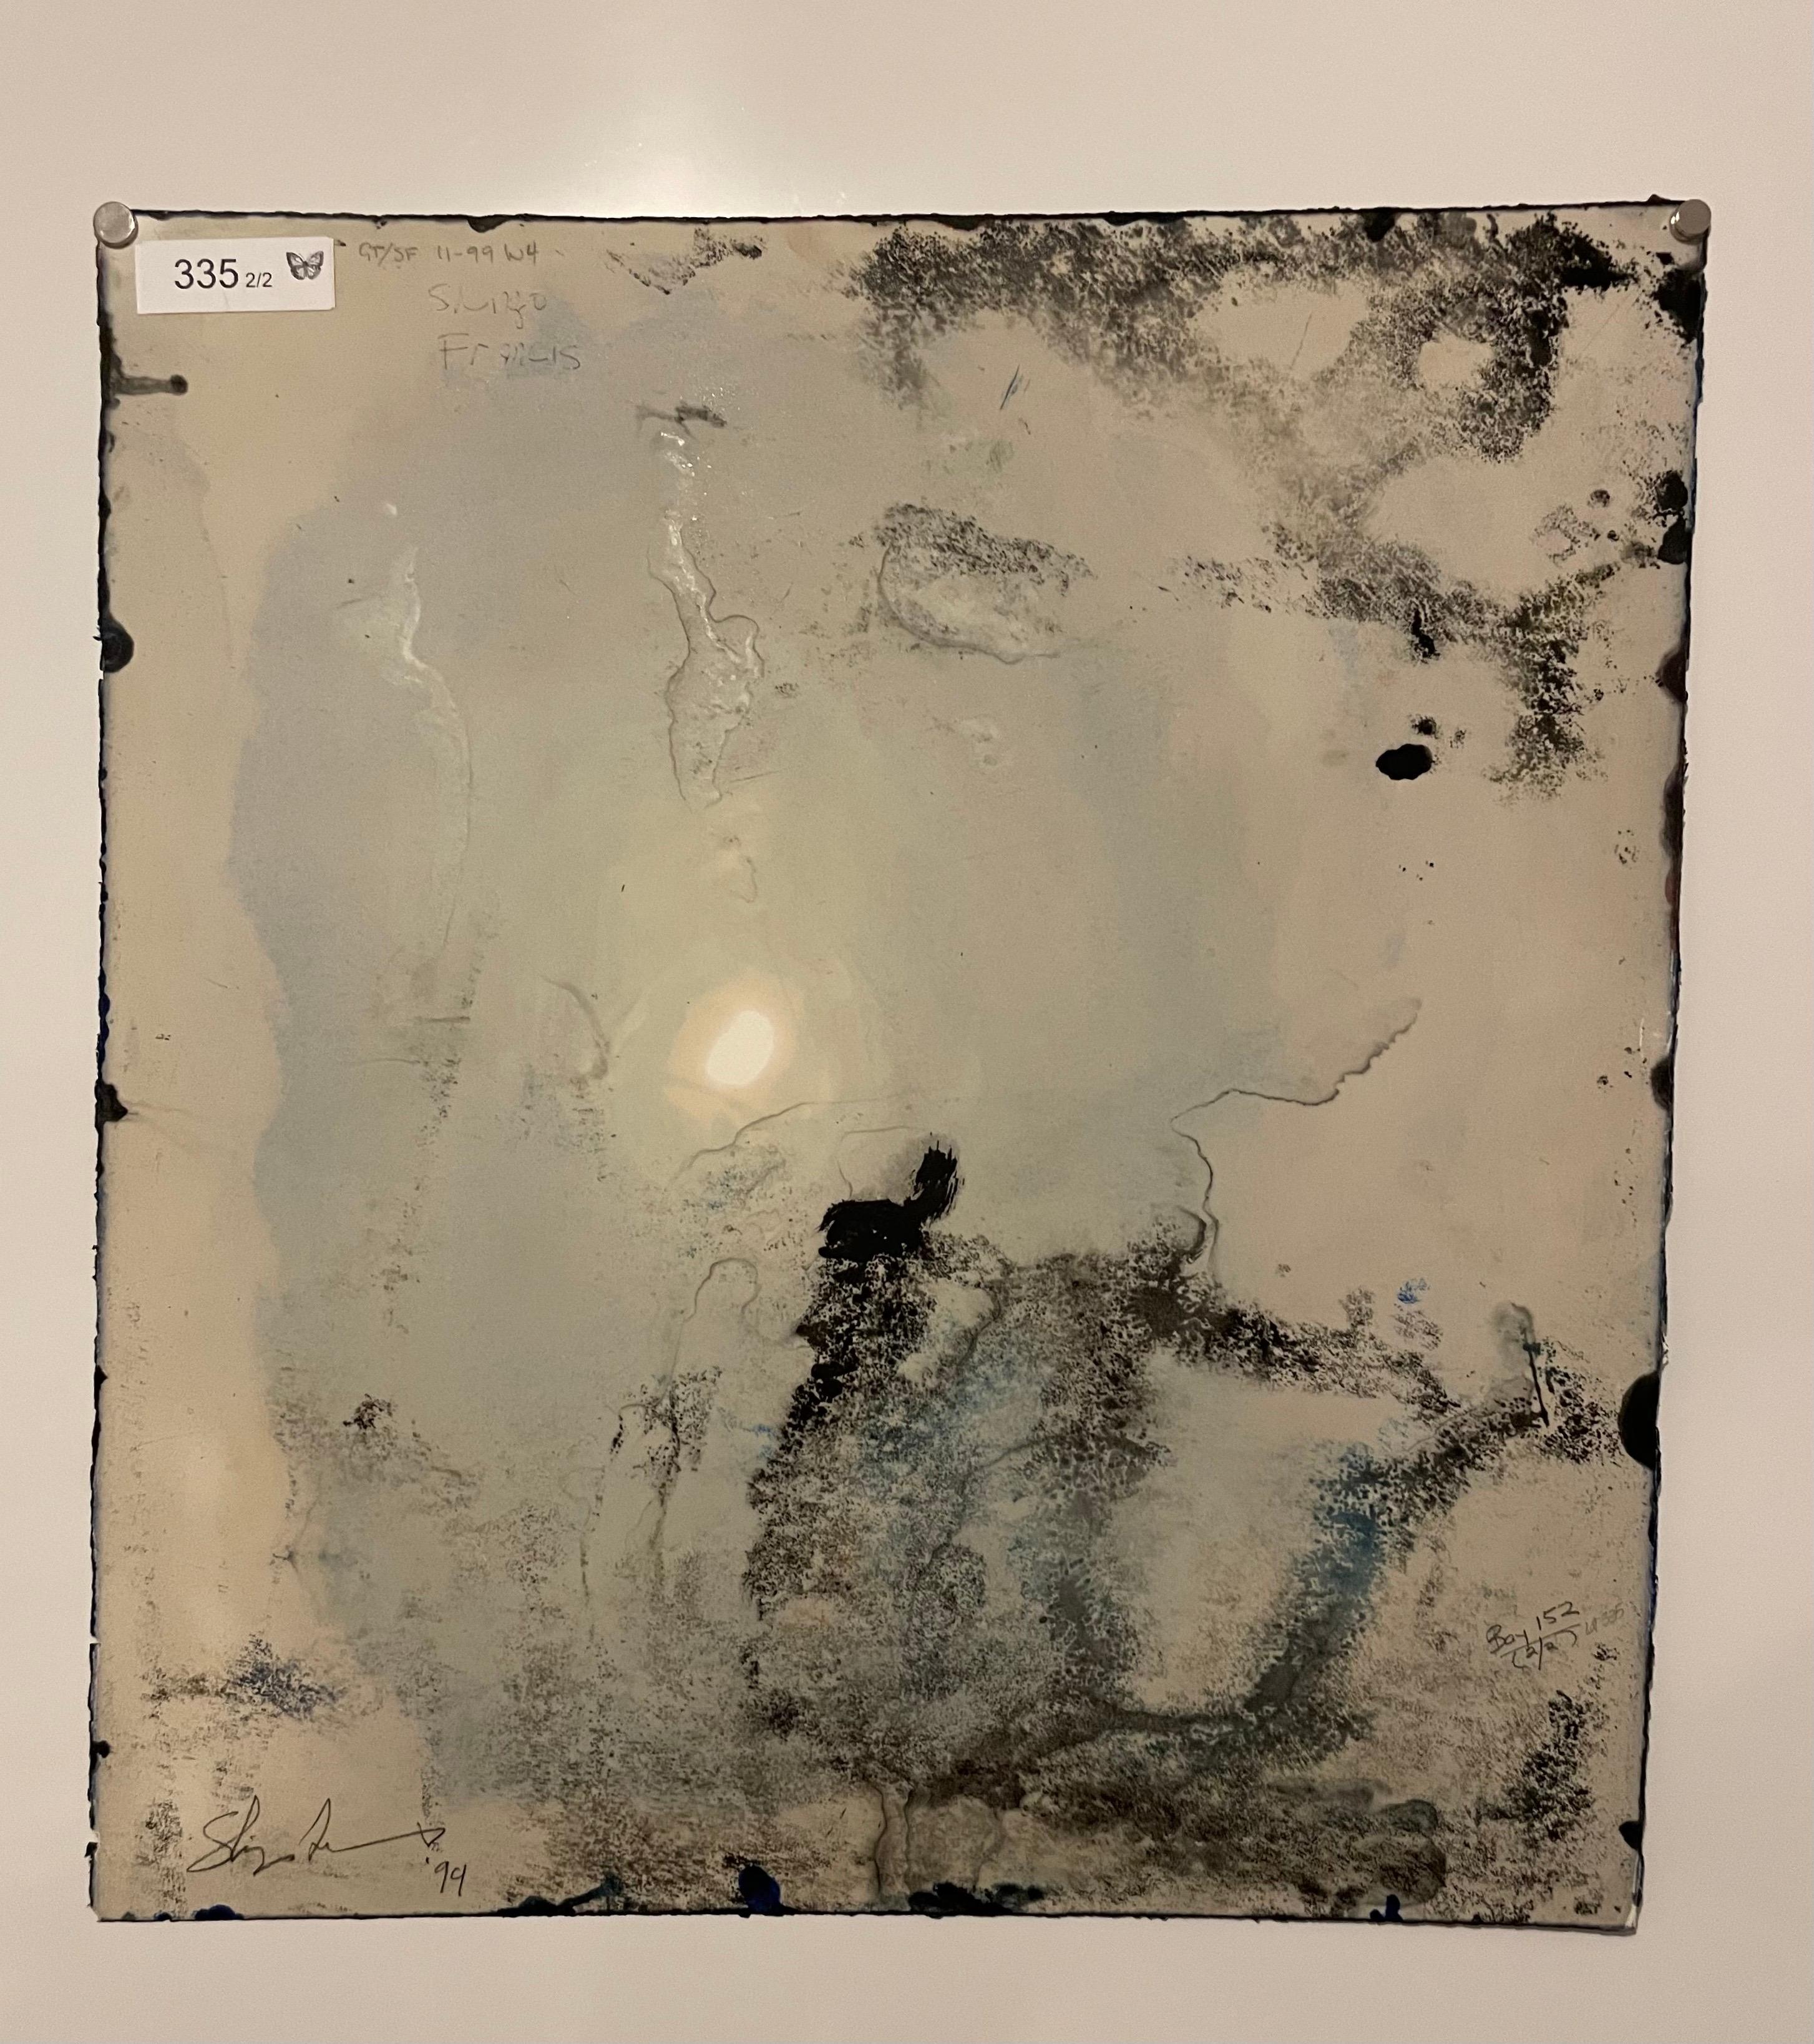 Francis, Shingo (Japanese/American, born 1969),  
W3 , 1999
Encaustic and watercolor painting on Arches paper, 
23.5 x 22.5 inches, 
Hand signed and dated verso 
Provenance: Garner Tullis Workshop

Shingo Francis is a painter, drawer and